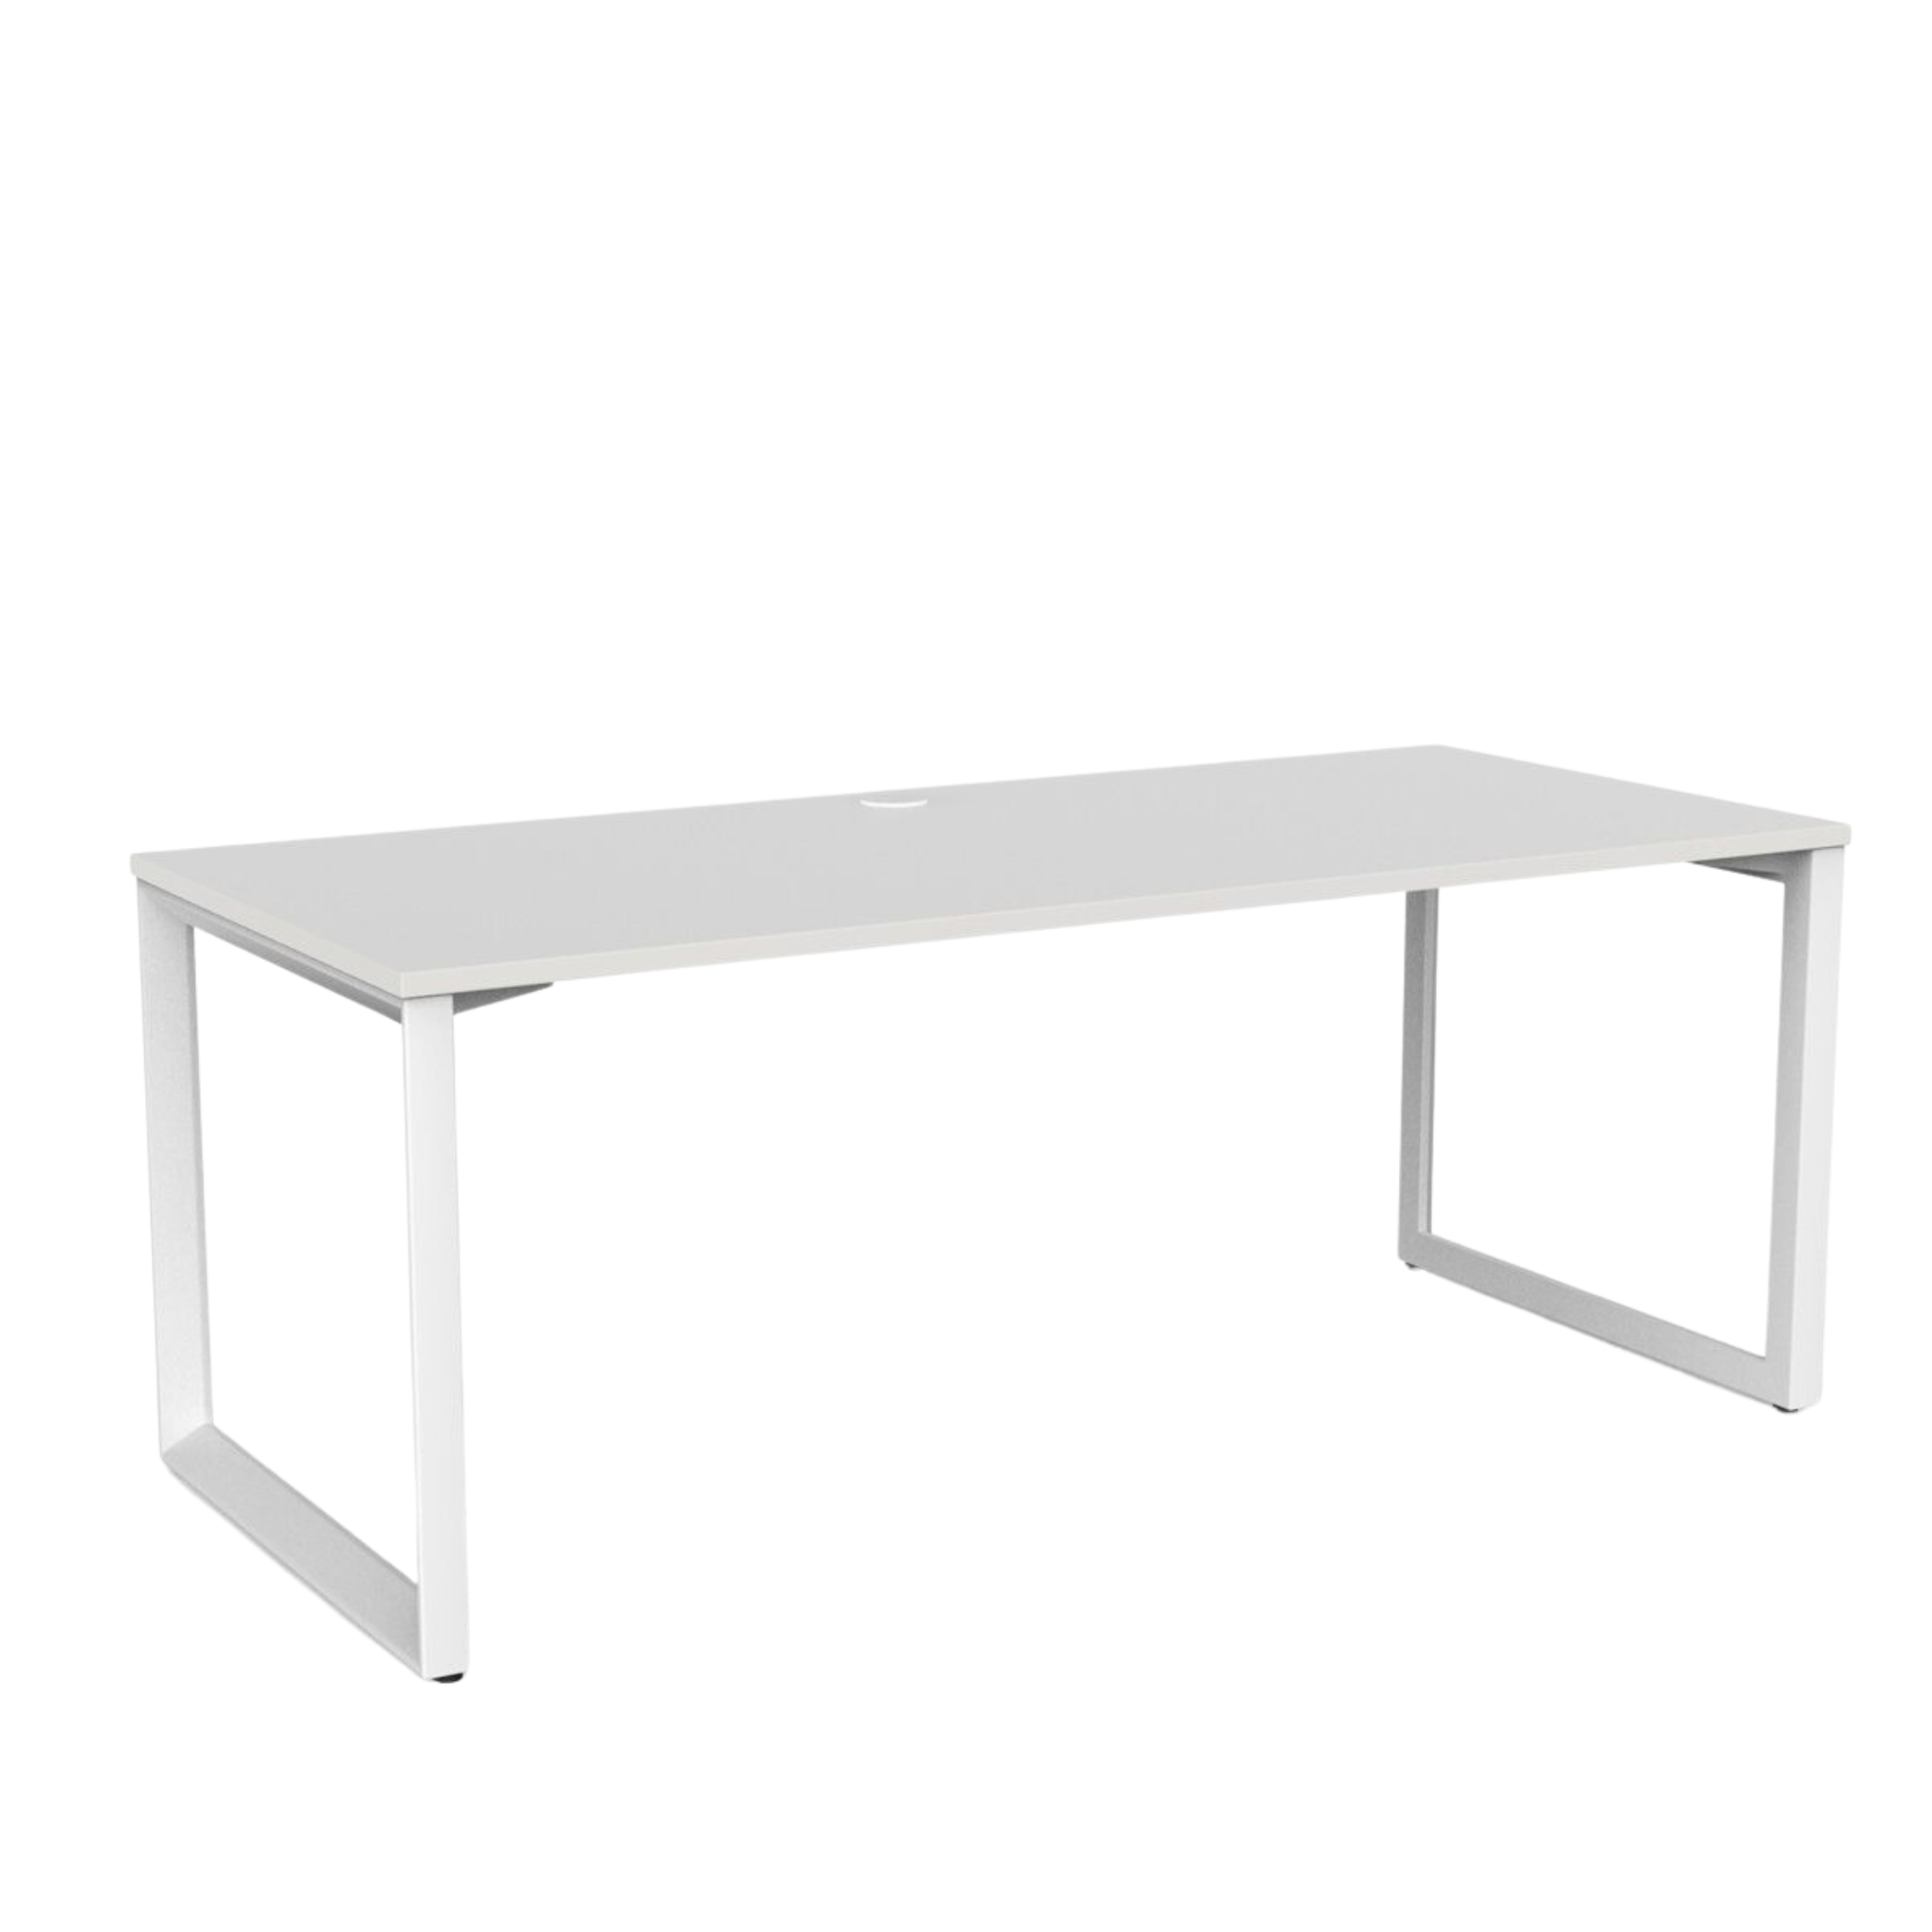 Anvil fixed height desk with white metal frame and white metleca top